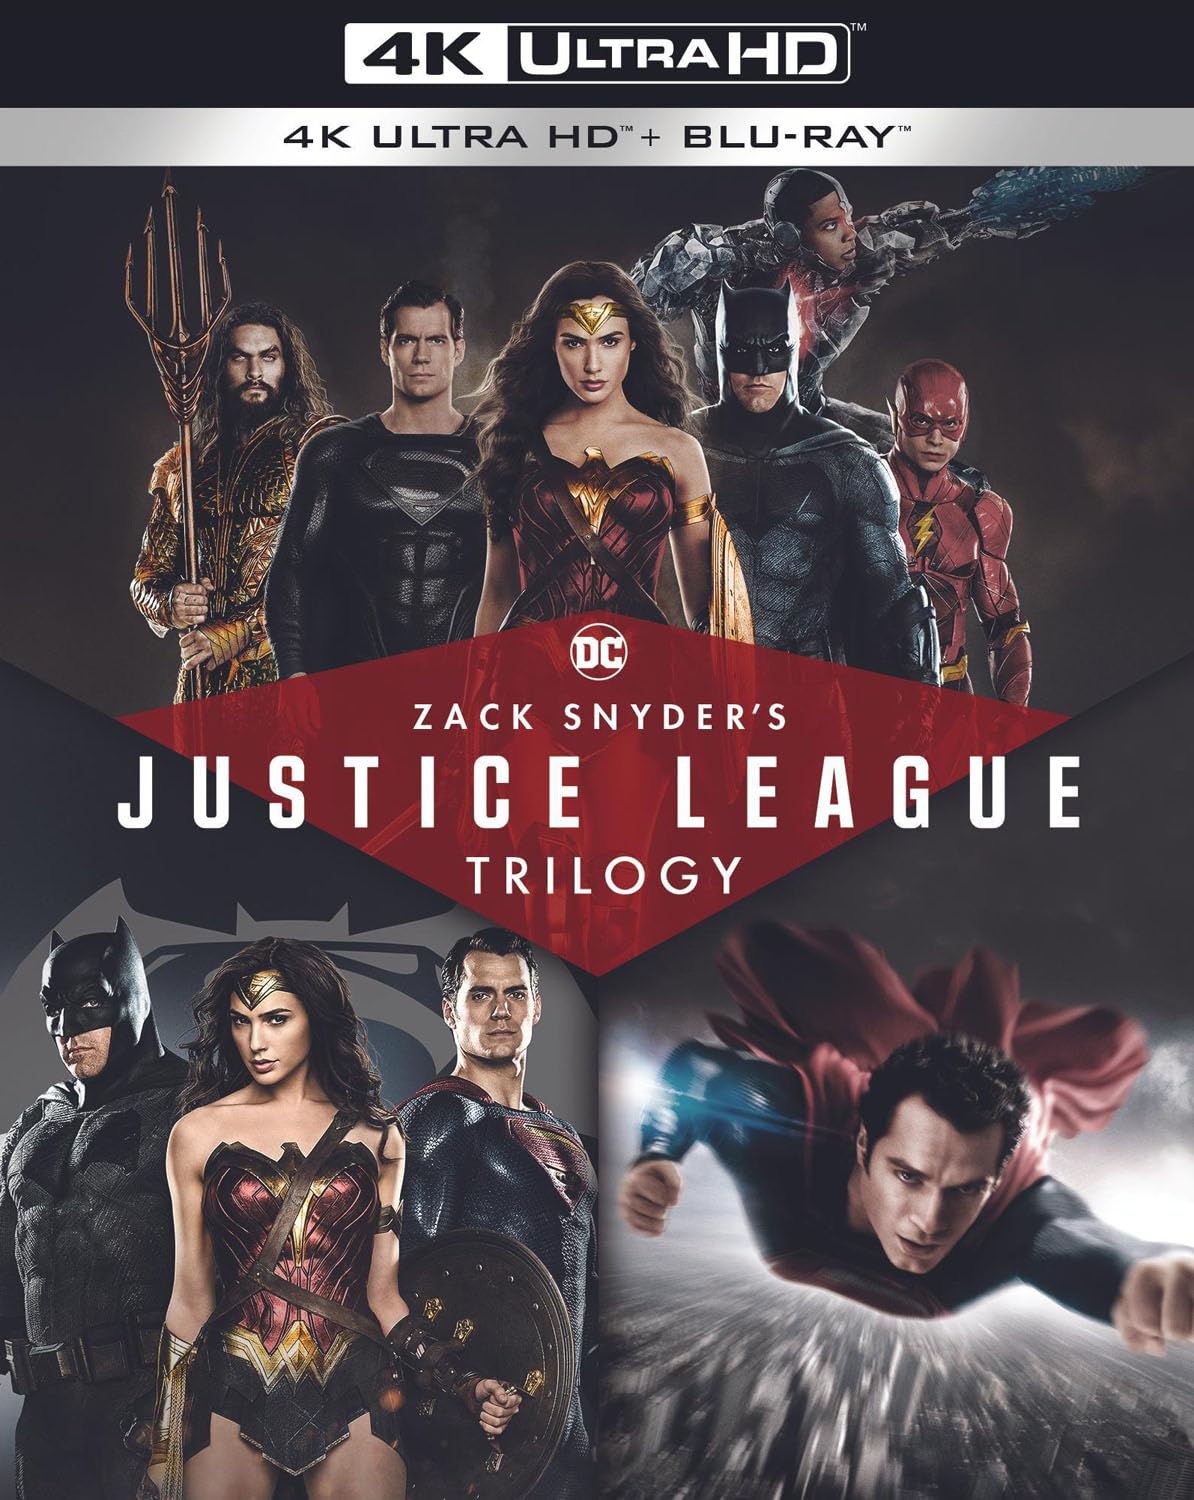 Zack Snyder’s Justice League Trilogy (4K-UHD) on MovieShack